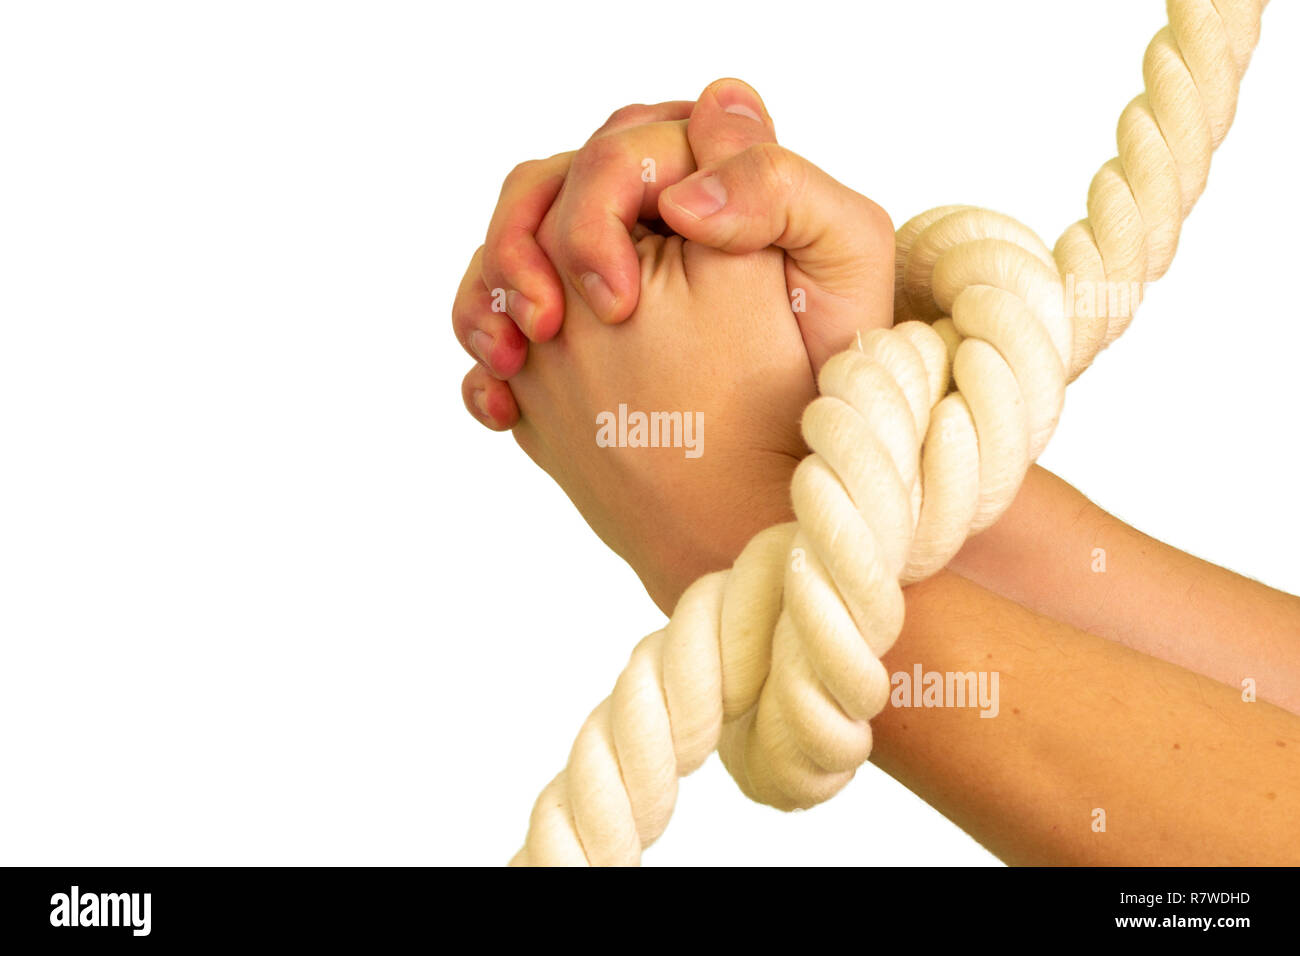 Rope Binding man's Hands. Isolated on white background Stock Photo